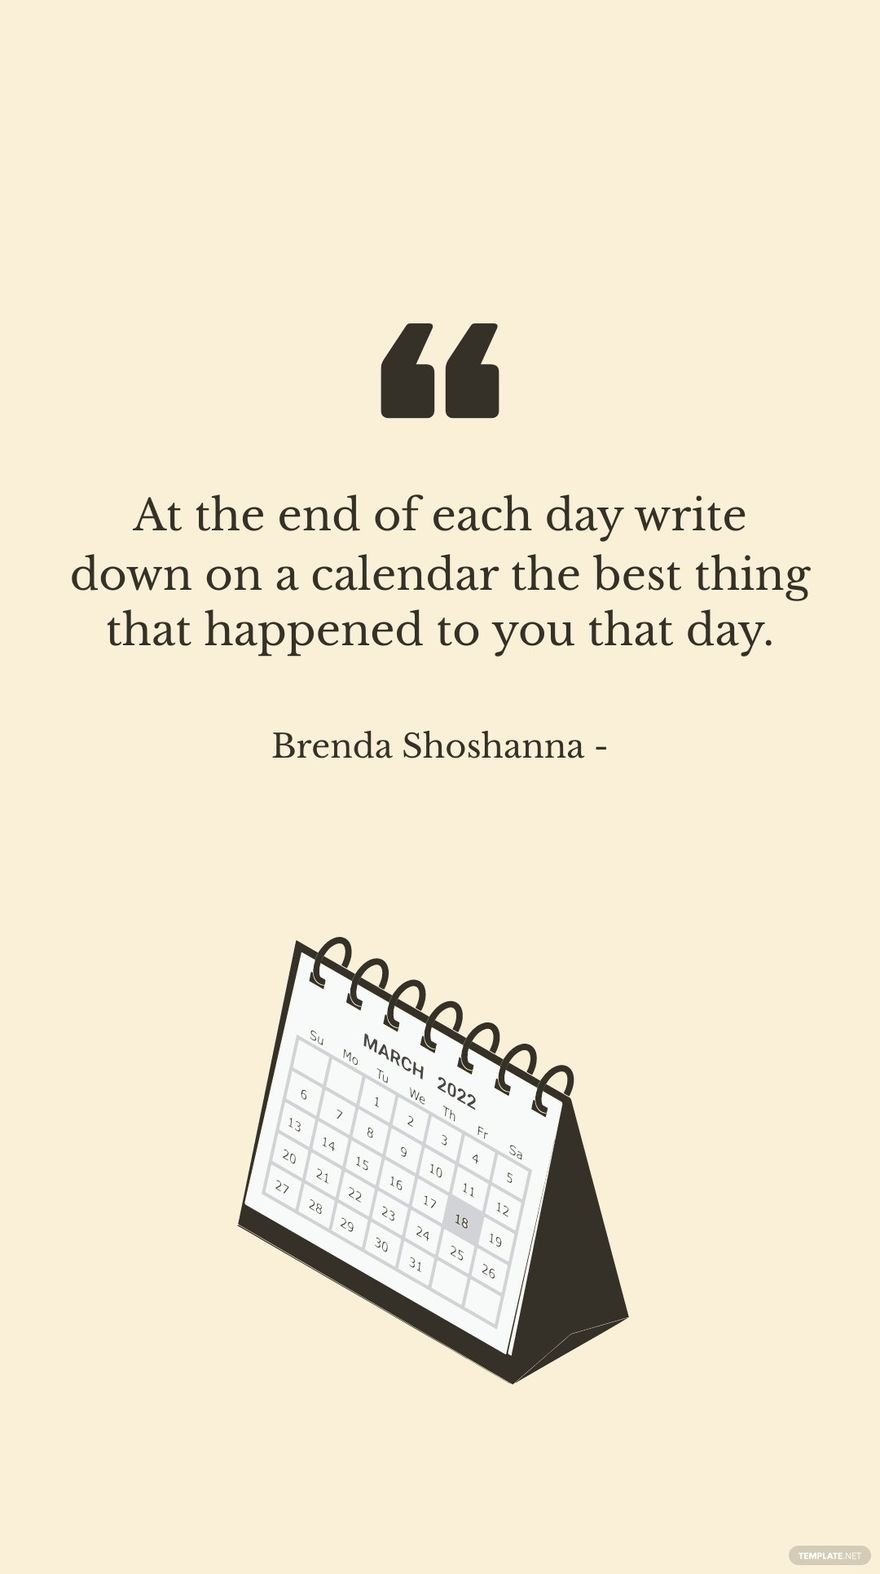 Free Brenda Shoshanna - At the end of each day write down on a calendar the best thing that happened to you that day.